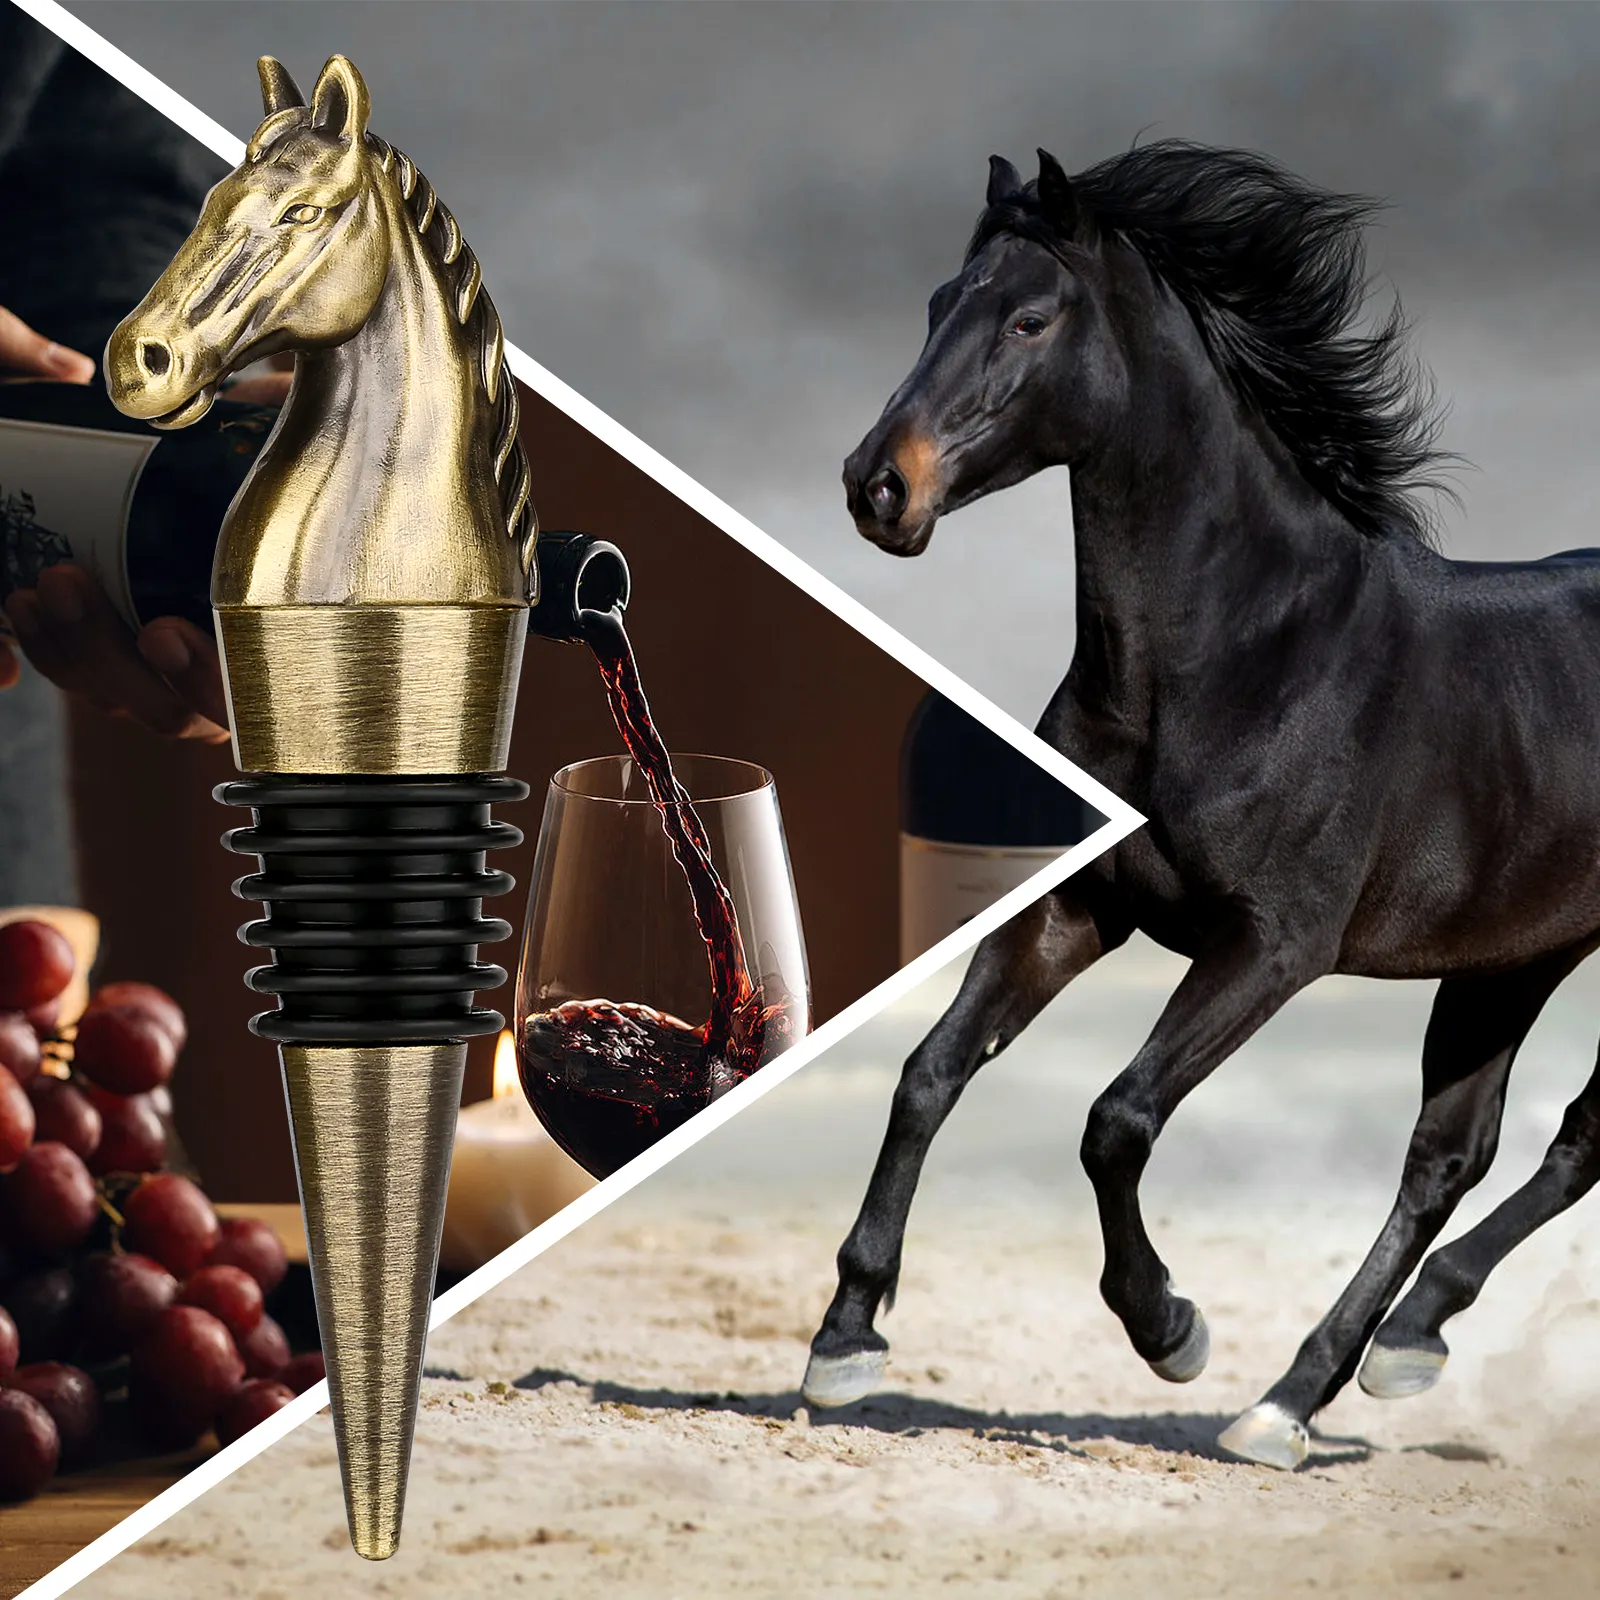 Exquisite Vintage Horse Head Wine Stopper for Men Champagne Cork Red Wine Bottle Accessories Birthday Gift